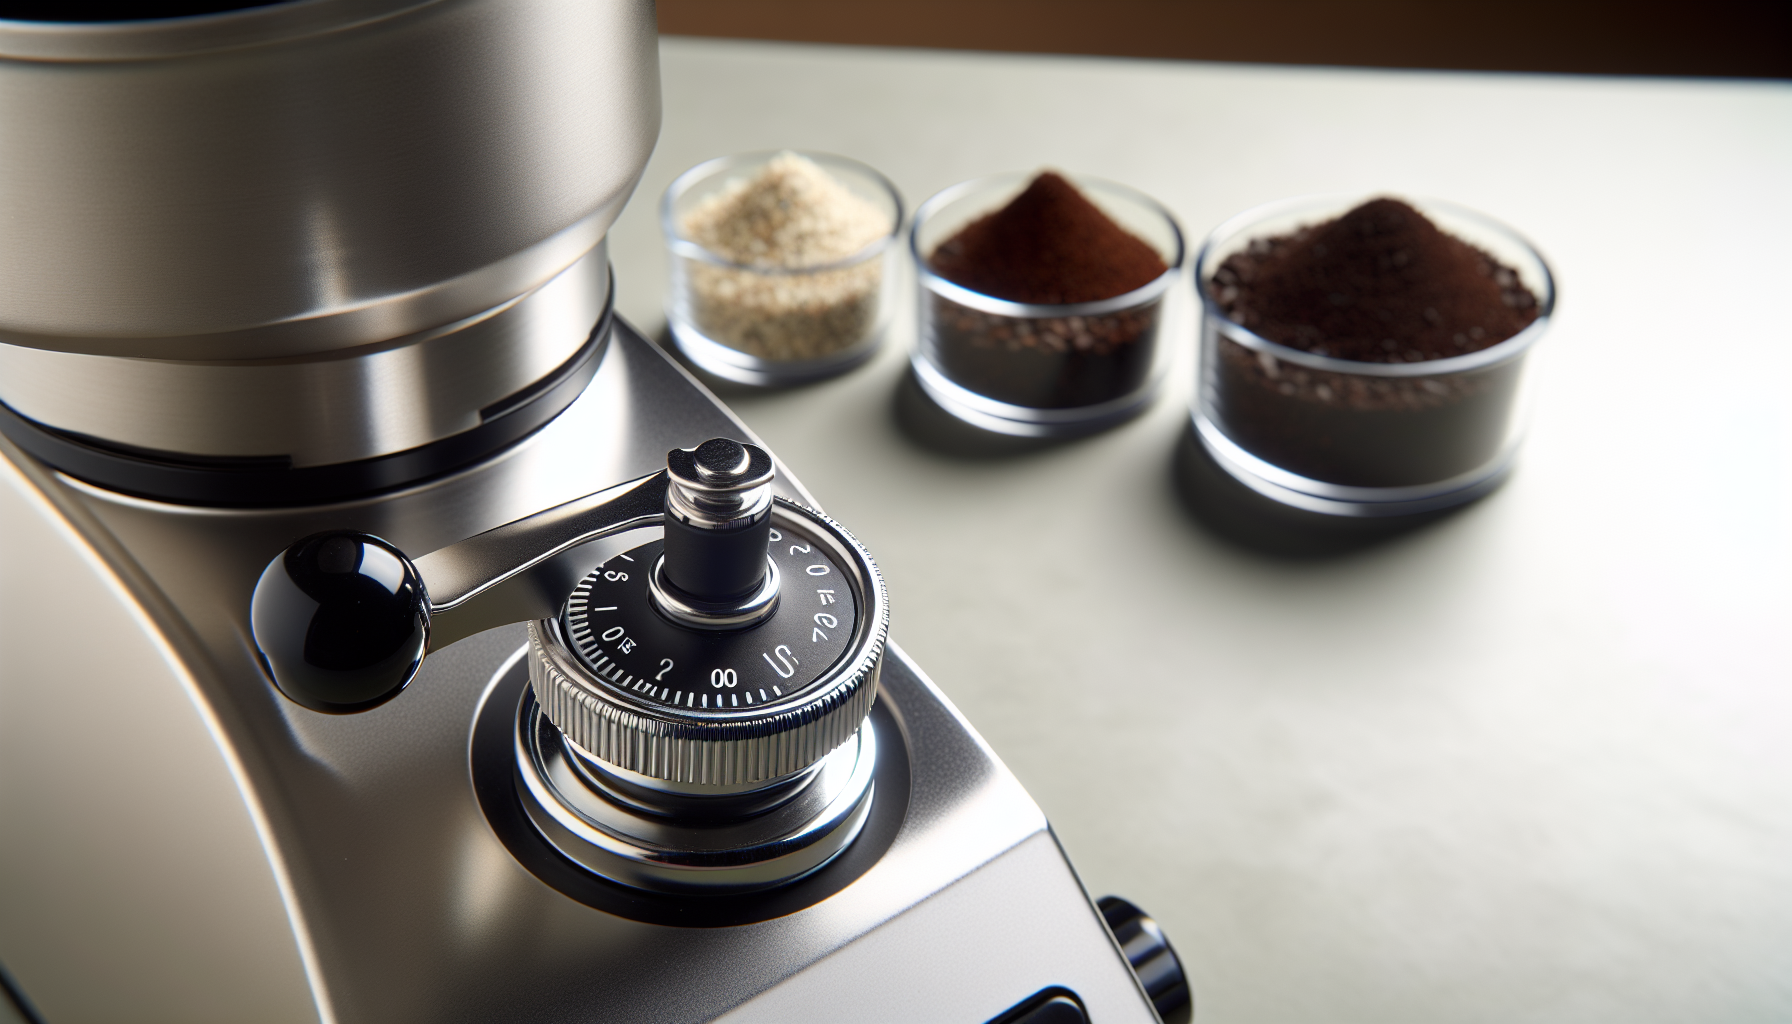 Adjustable grind size settings on a coffee grinder